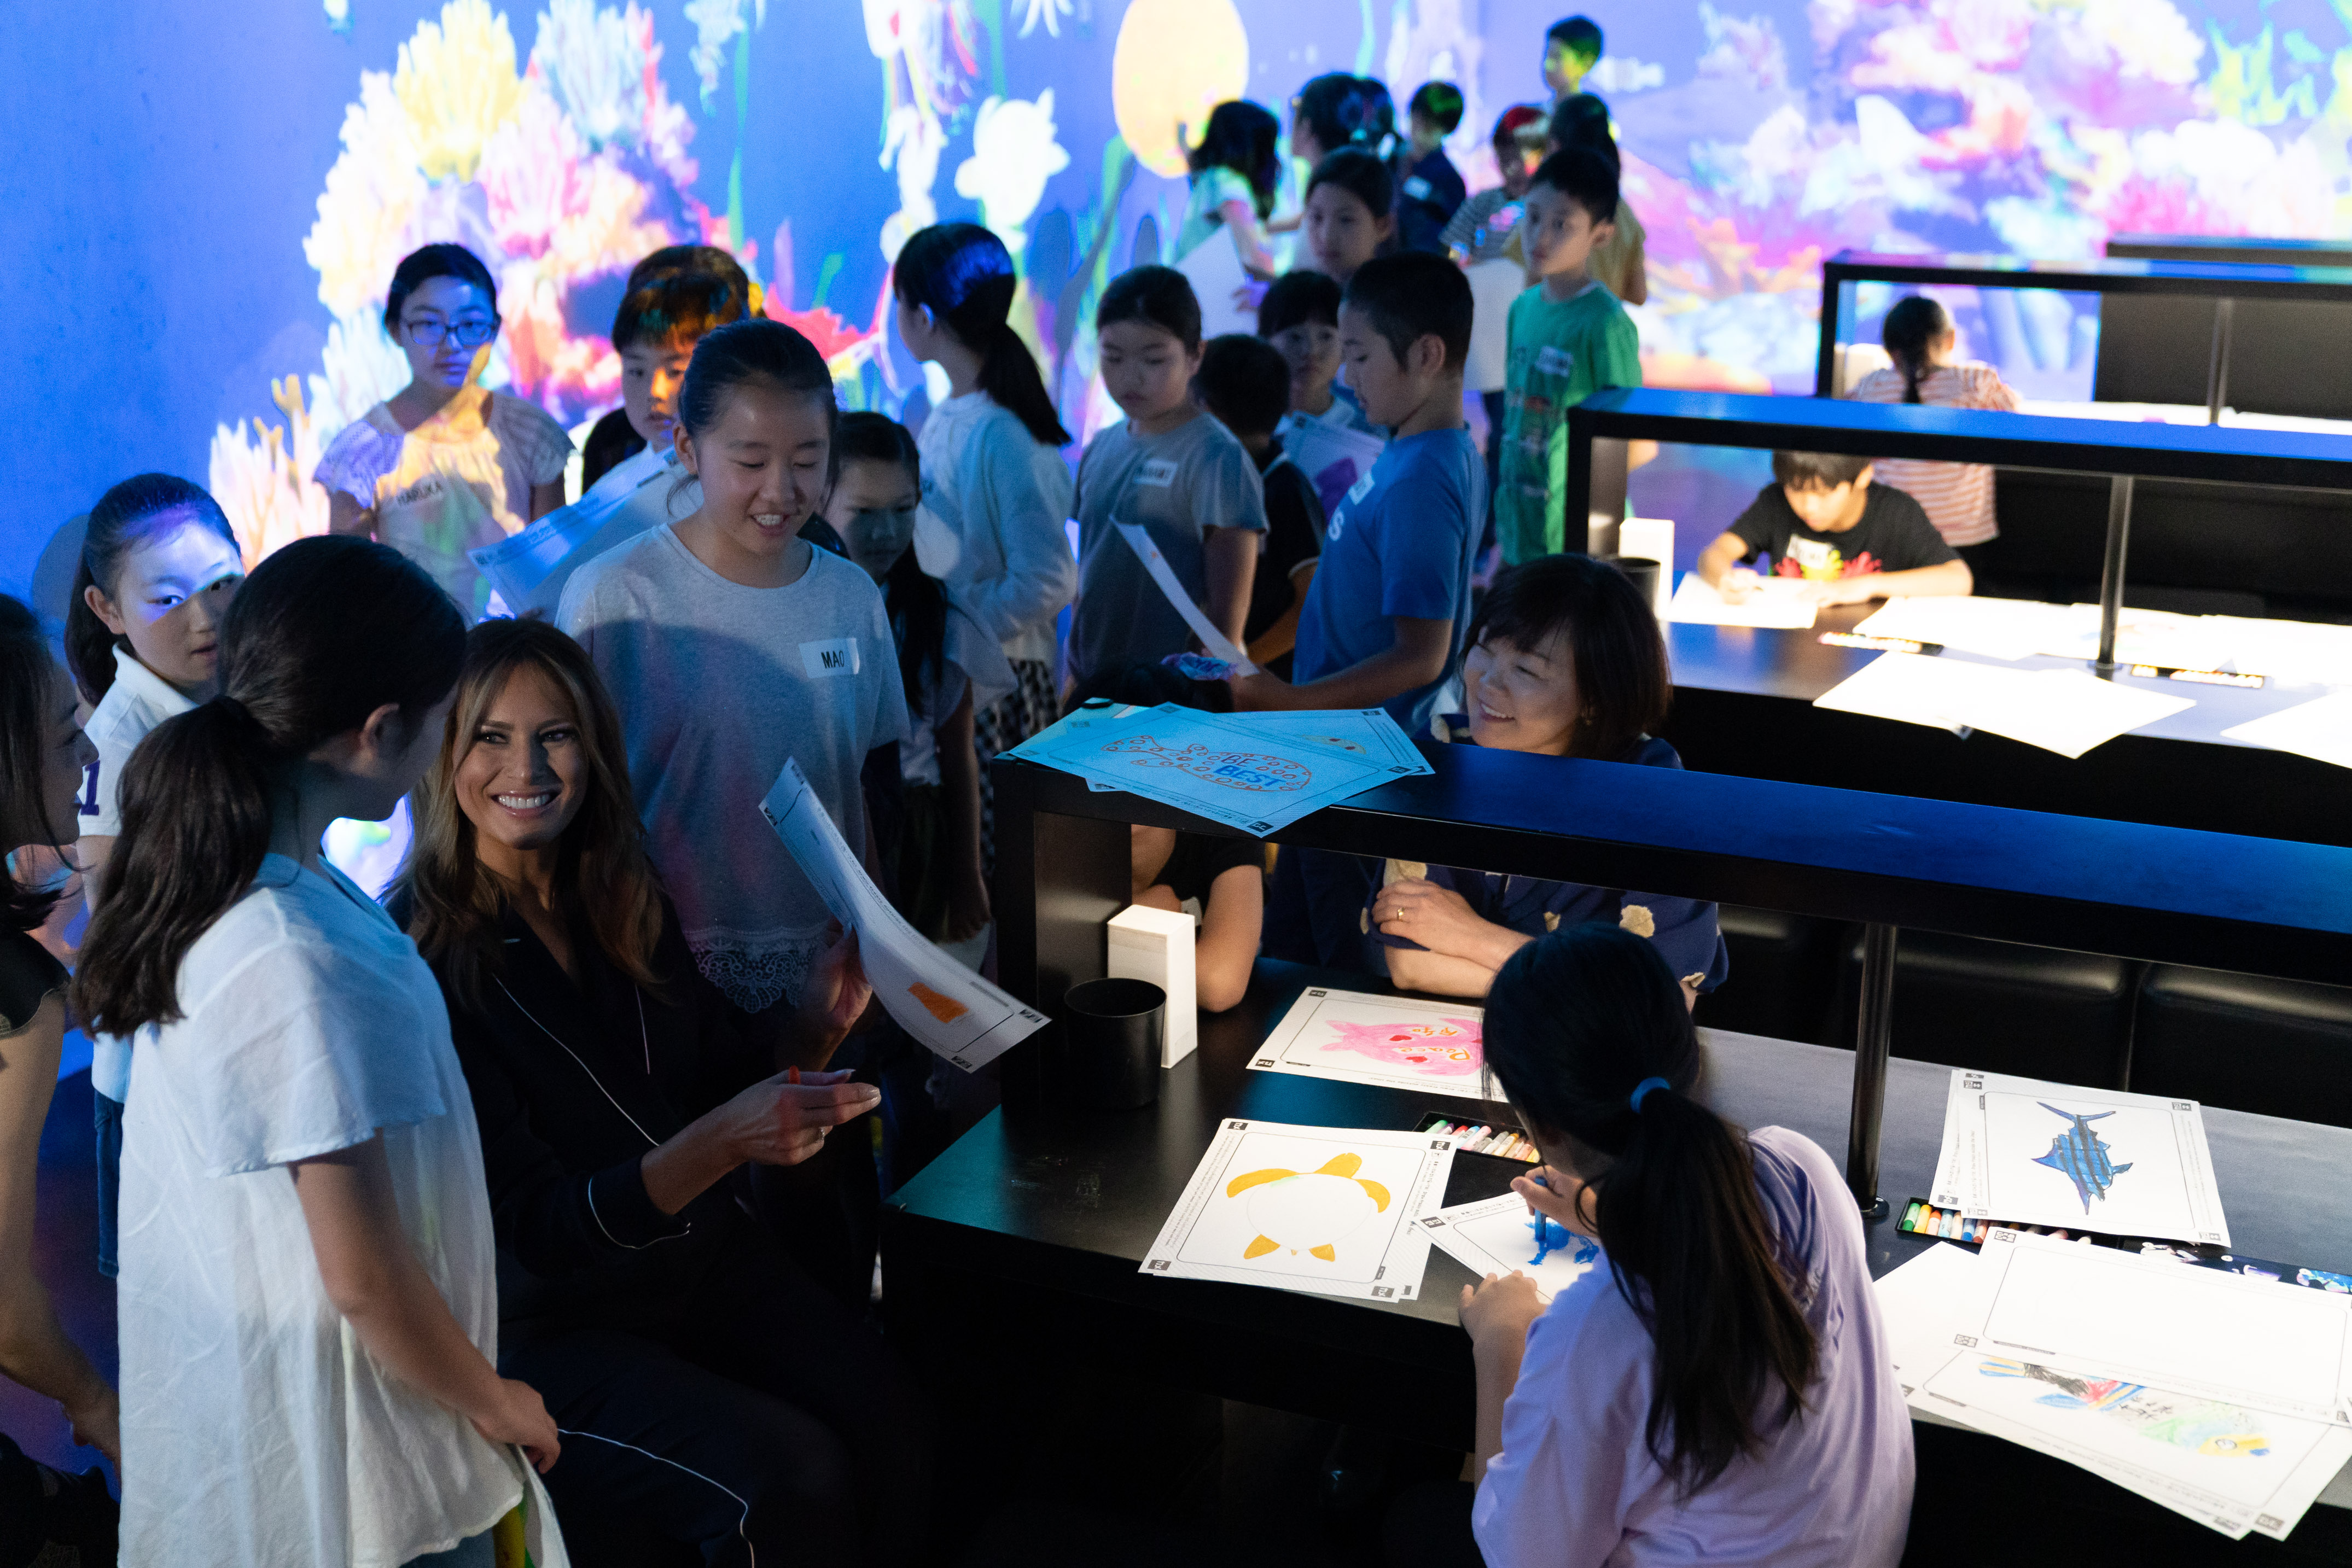 TOKYO, JAPAN - MAY 26: U.S. first Lady Melania Trump (L) and Japan's Prime Minister Shinzo Abe's wife Akie Abe (R) meet primary school students during her visit at the MORI Building DIGITAL ART MUSEUM on May 26, 2019 in Tokyo, Japan. (Photo by Pierre Emmanuel Deletree - Pool/Getty Images)